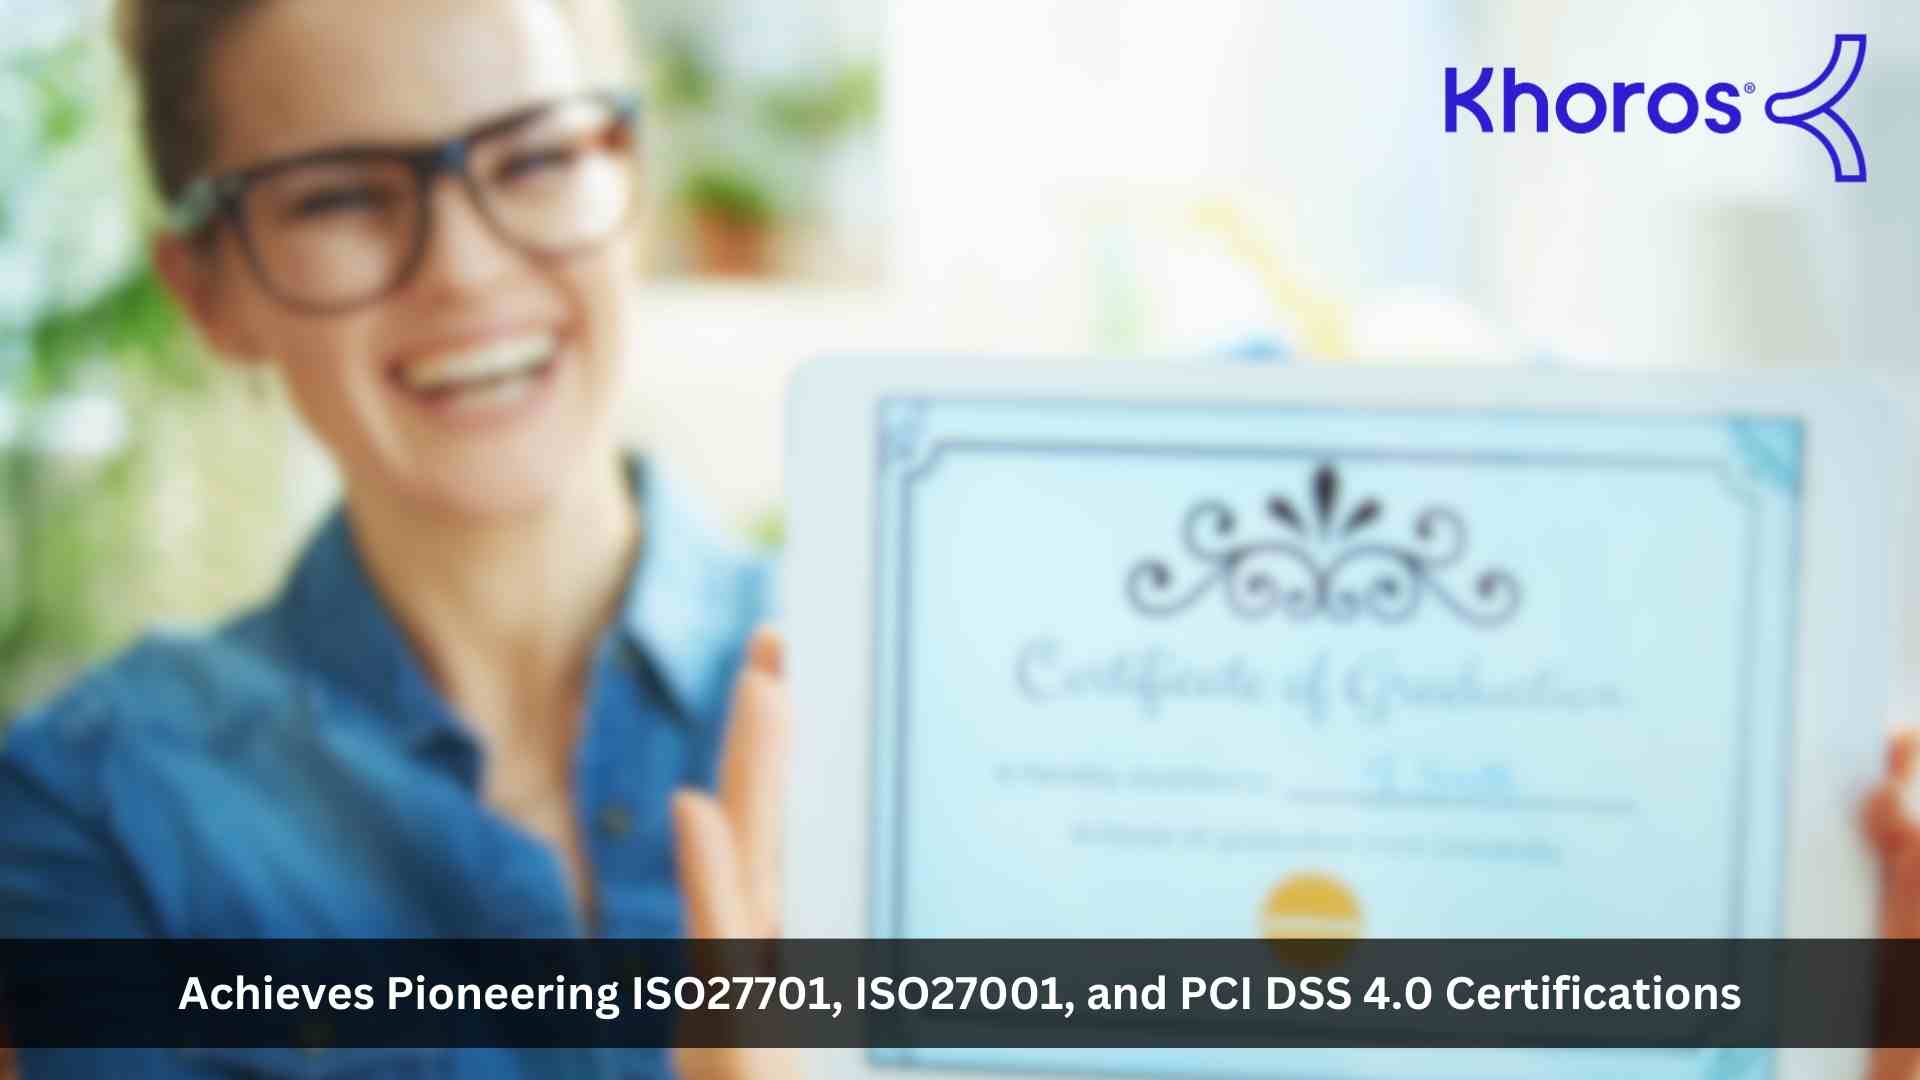 Khoros Achieves Pioneering ISO27701, ISO27001, and PCI DSS 4.0 Certifications